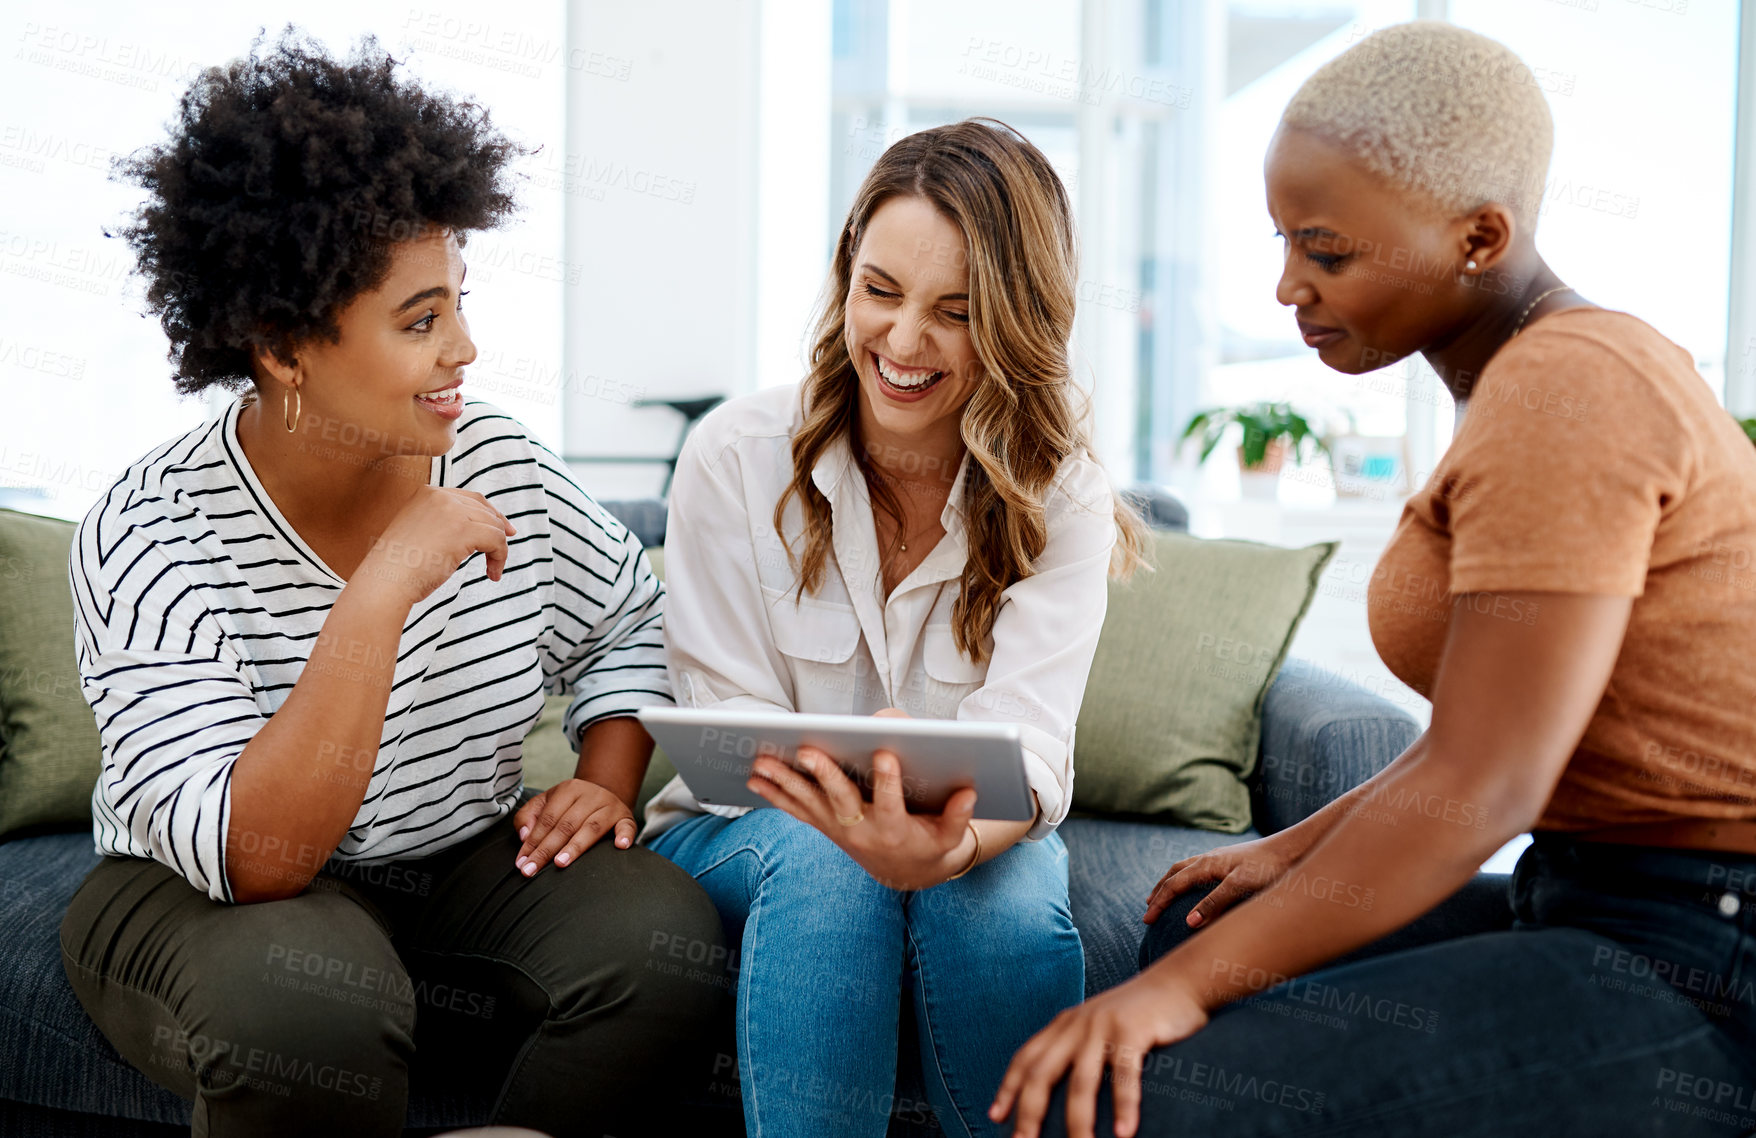 Buy stock photo Shot of a group of businesswomen working together on a digital tablet in an office